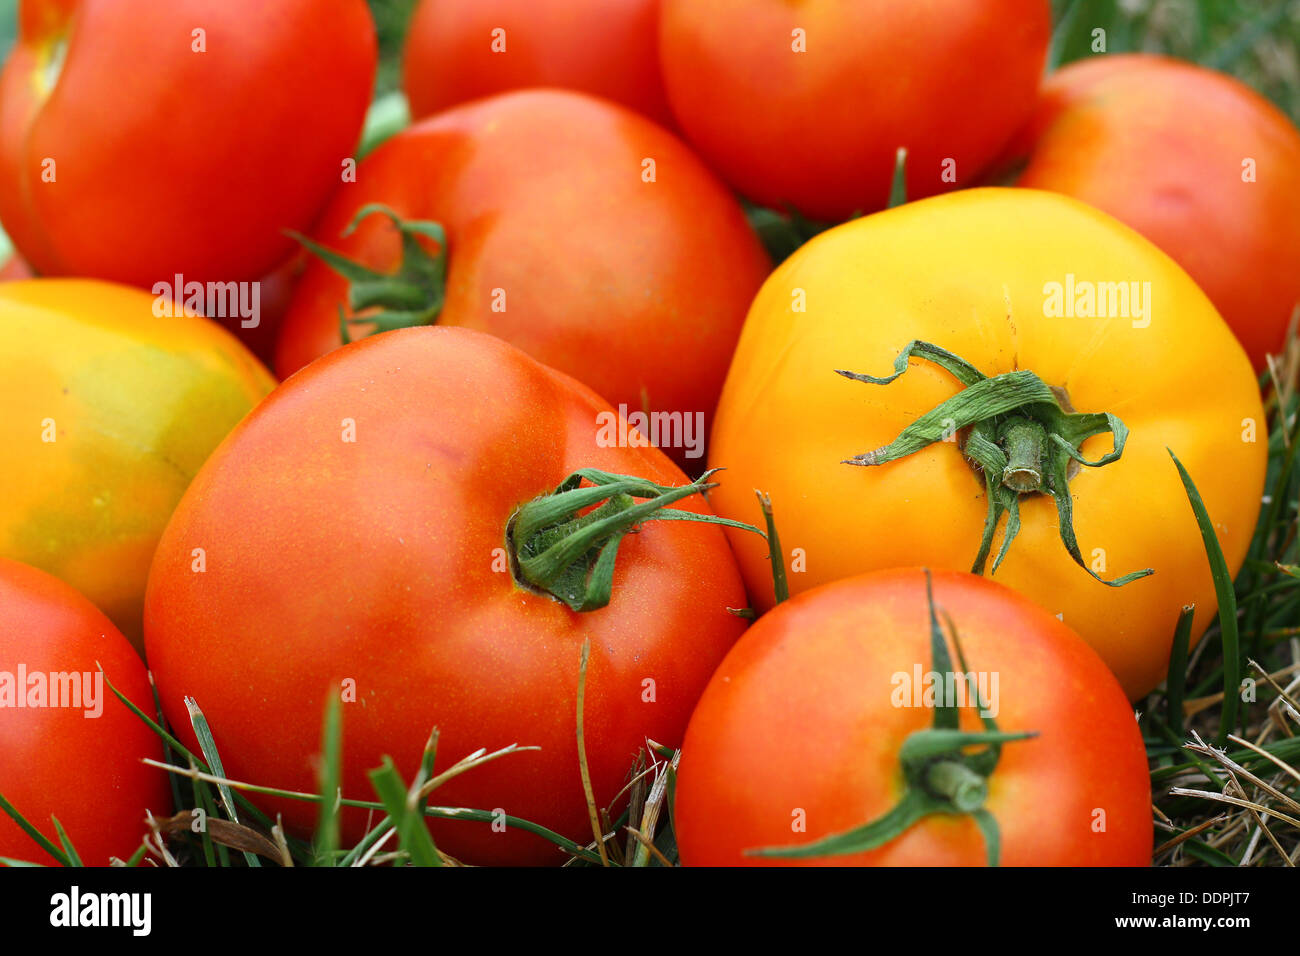 A pile of healthy, fresh picked red and yellow tomatoes is laying outside in the grass Stock Photo